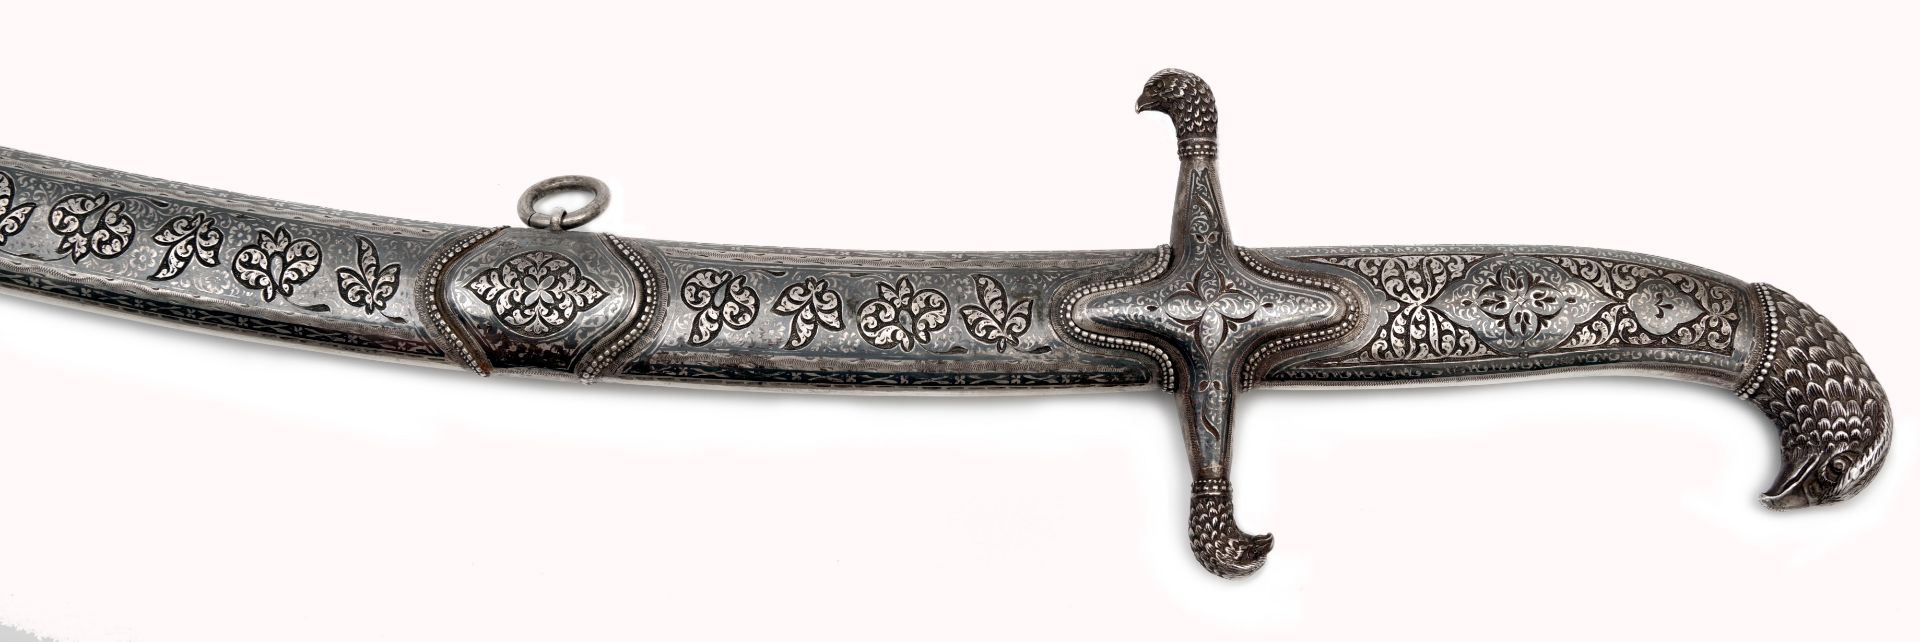 A Fabulous Russian Imperial Presentation Sword in Niello Silver Mounts - Image 6 of 6